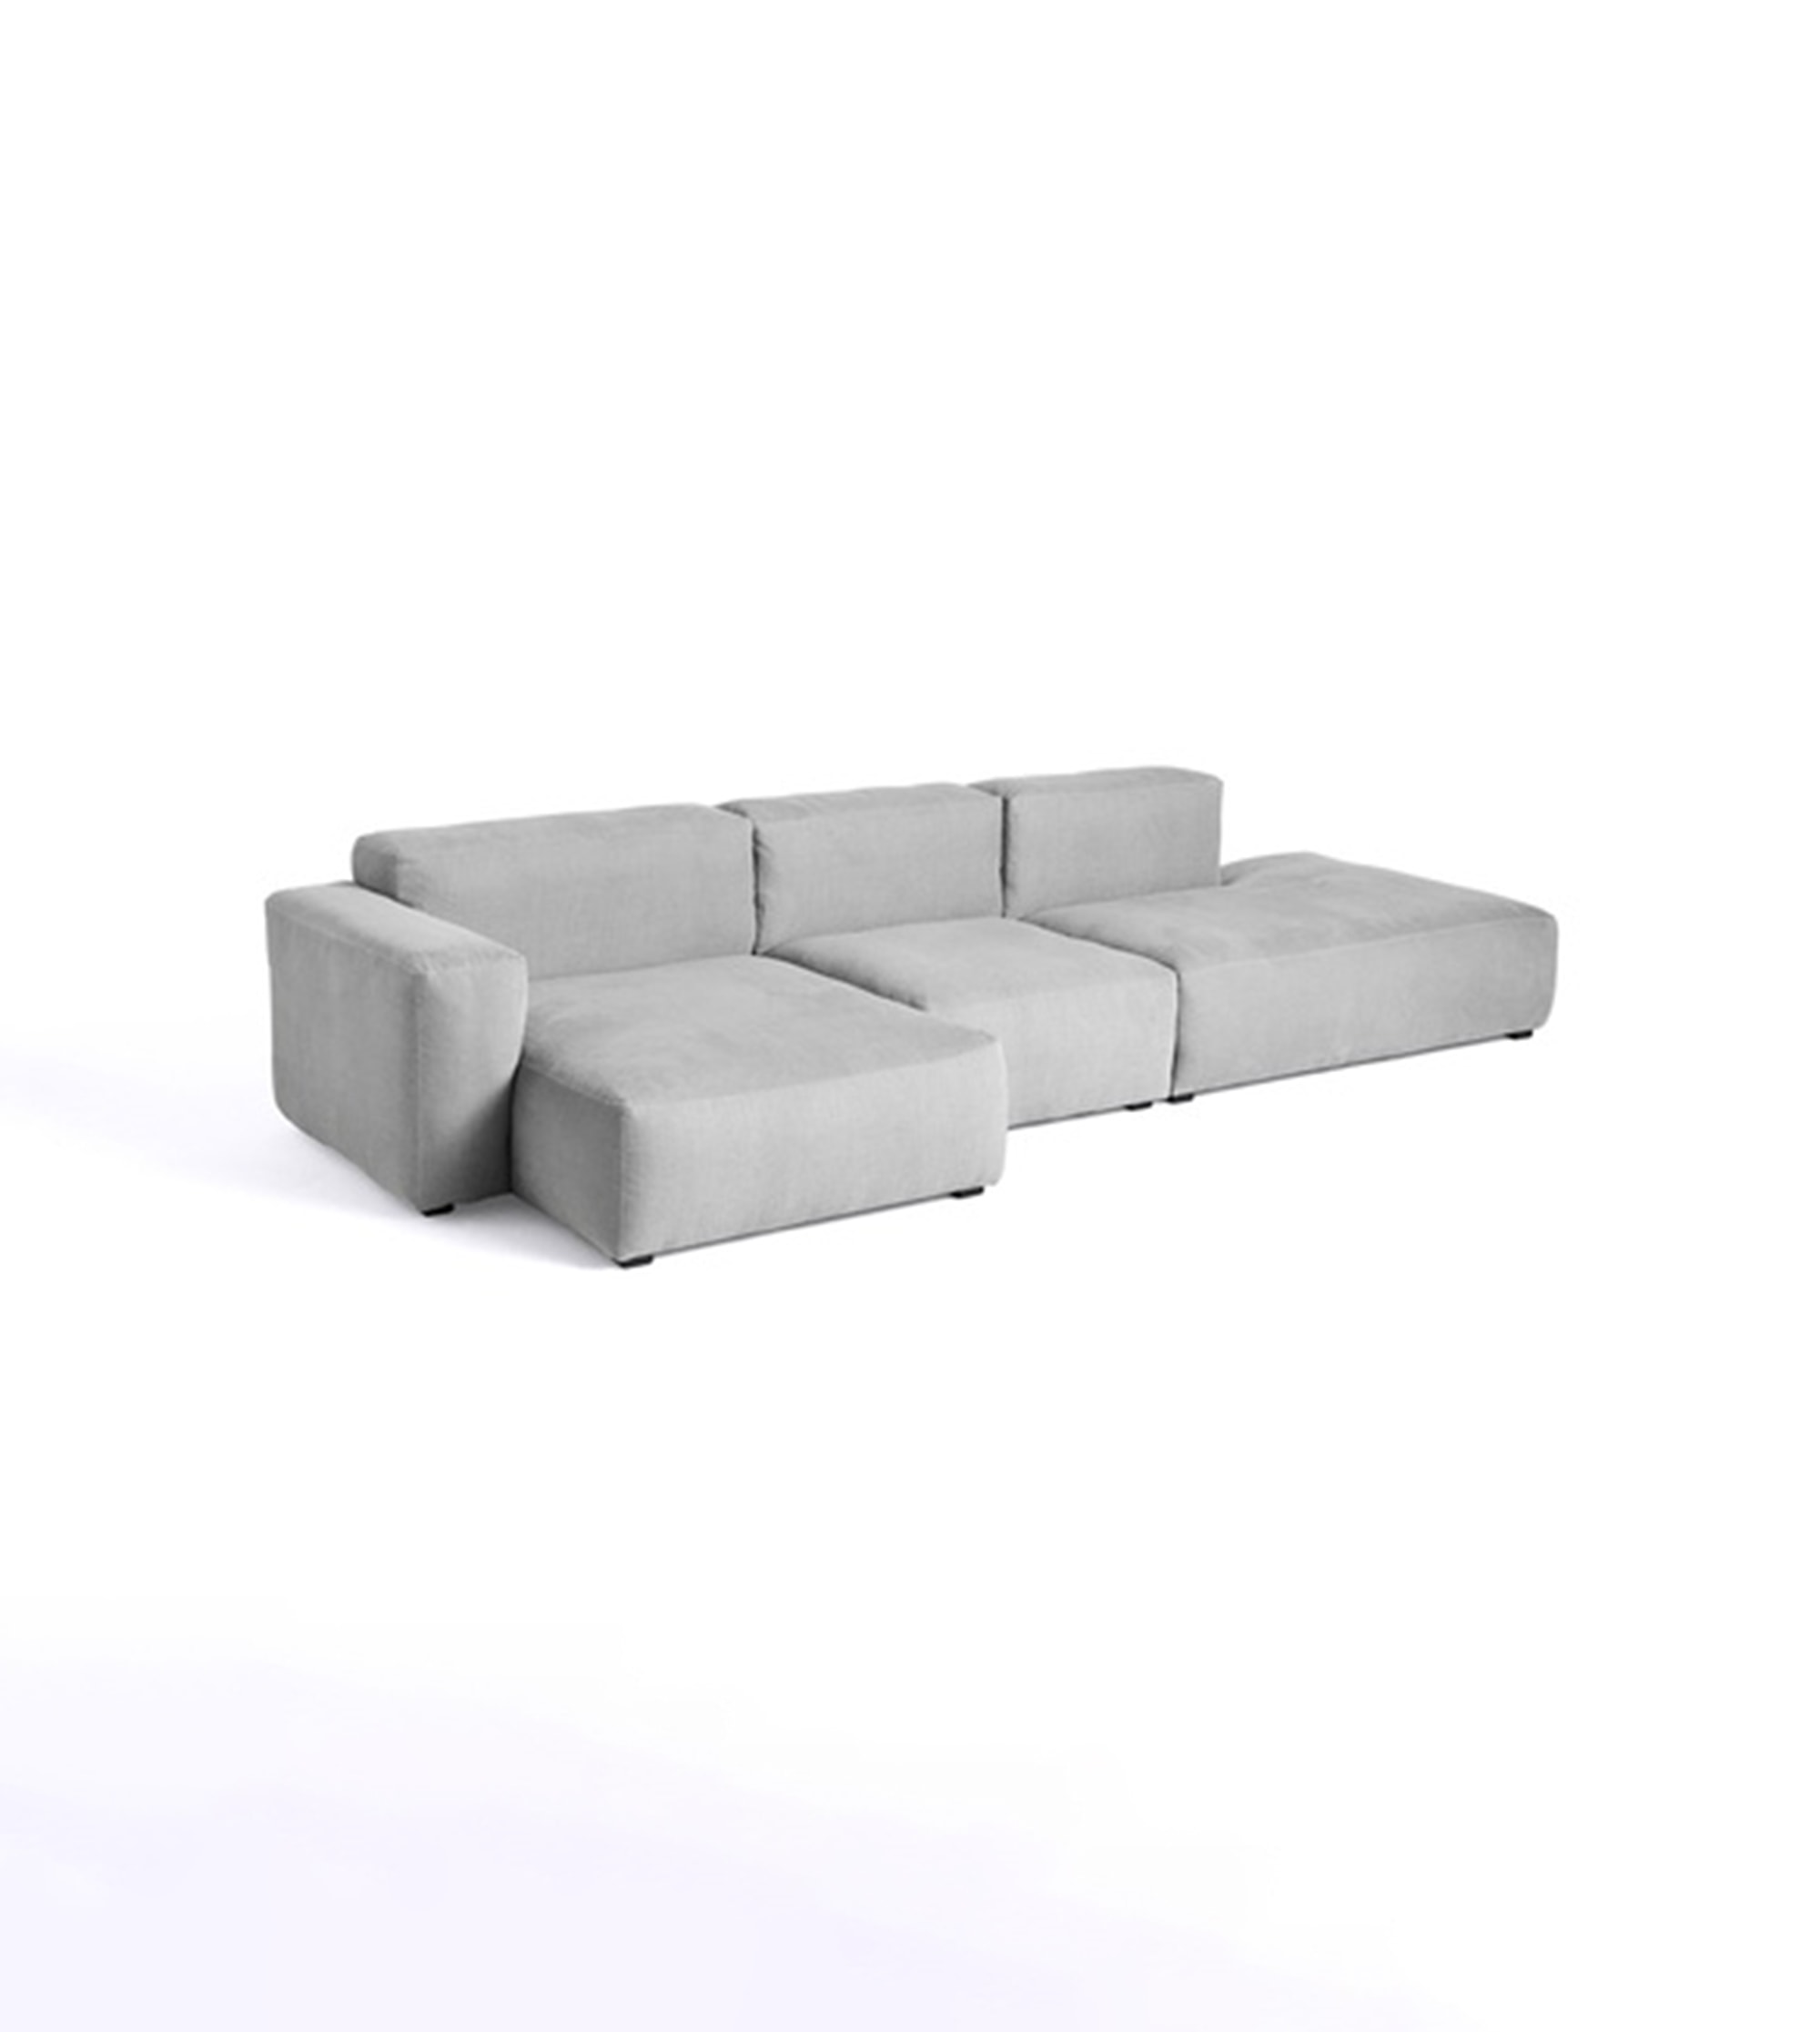 MAGS SOFT 3 SEATER COMBINATION 4 LOW ARMREST